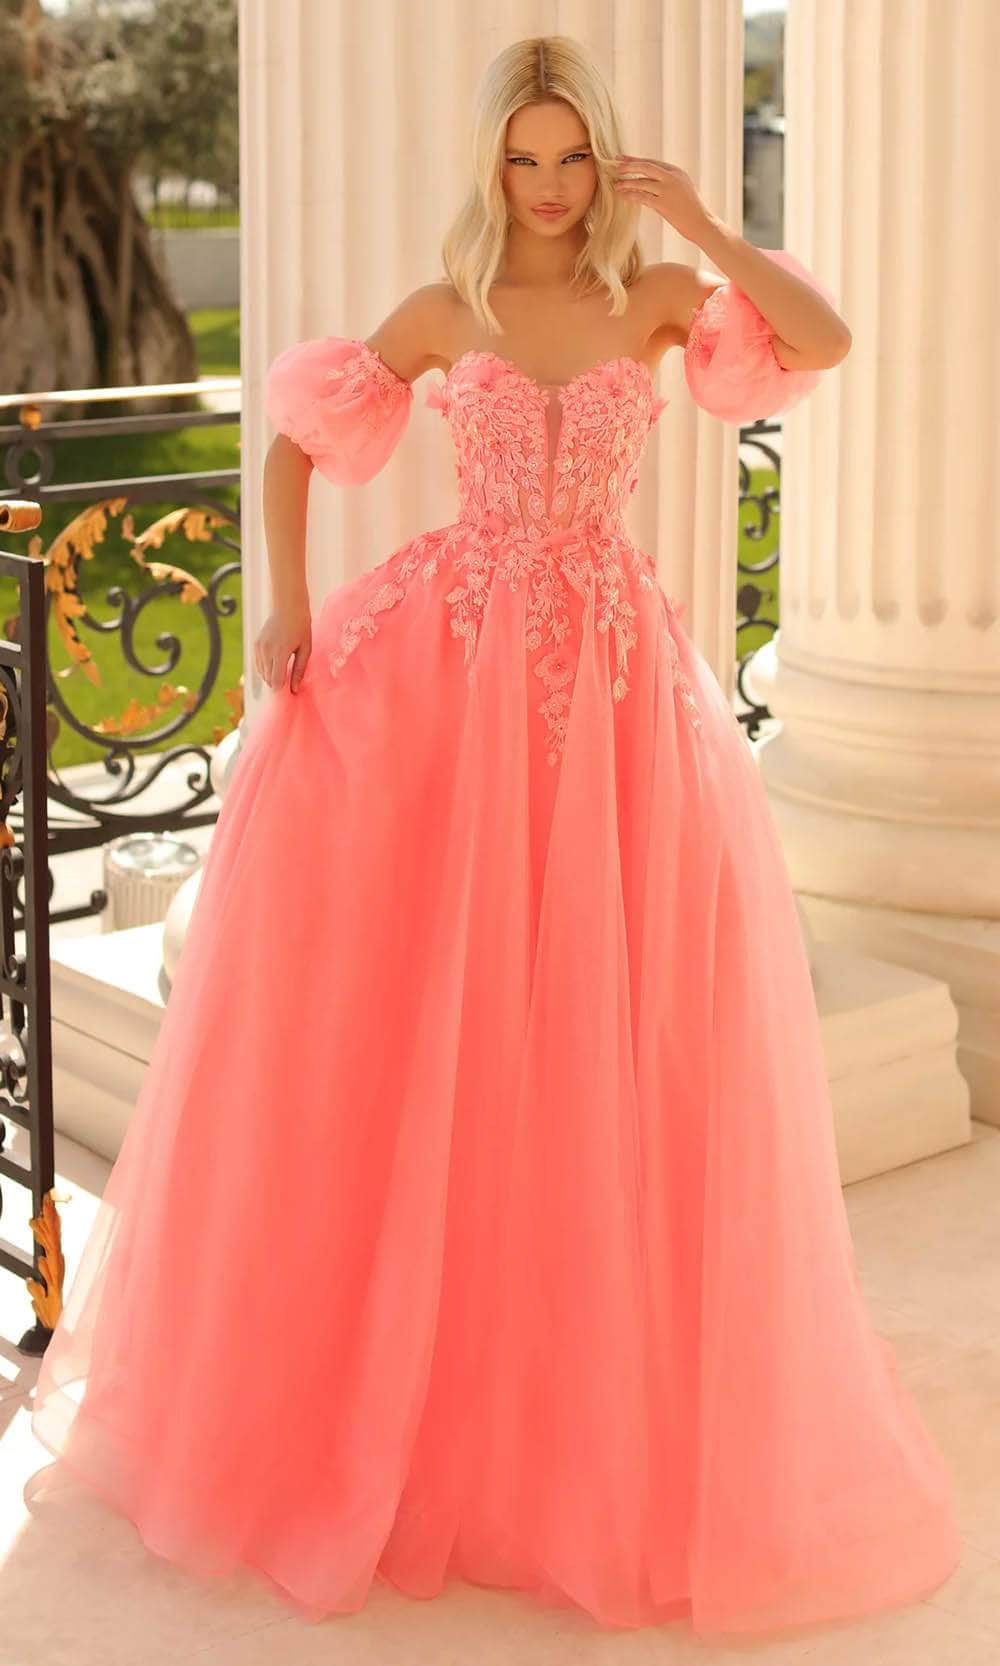 Clarisse 810721 - Applique Corset Prom Gown Special Occasion Dress 00 / Light Coral